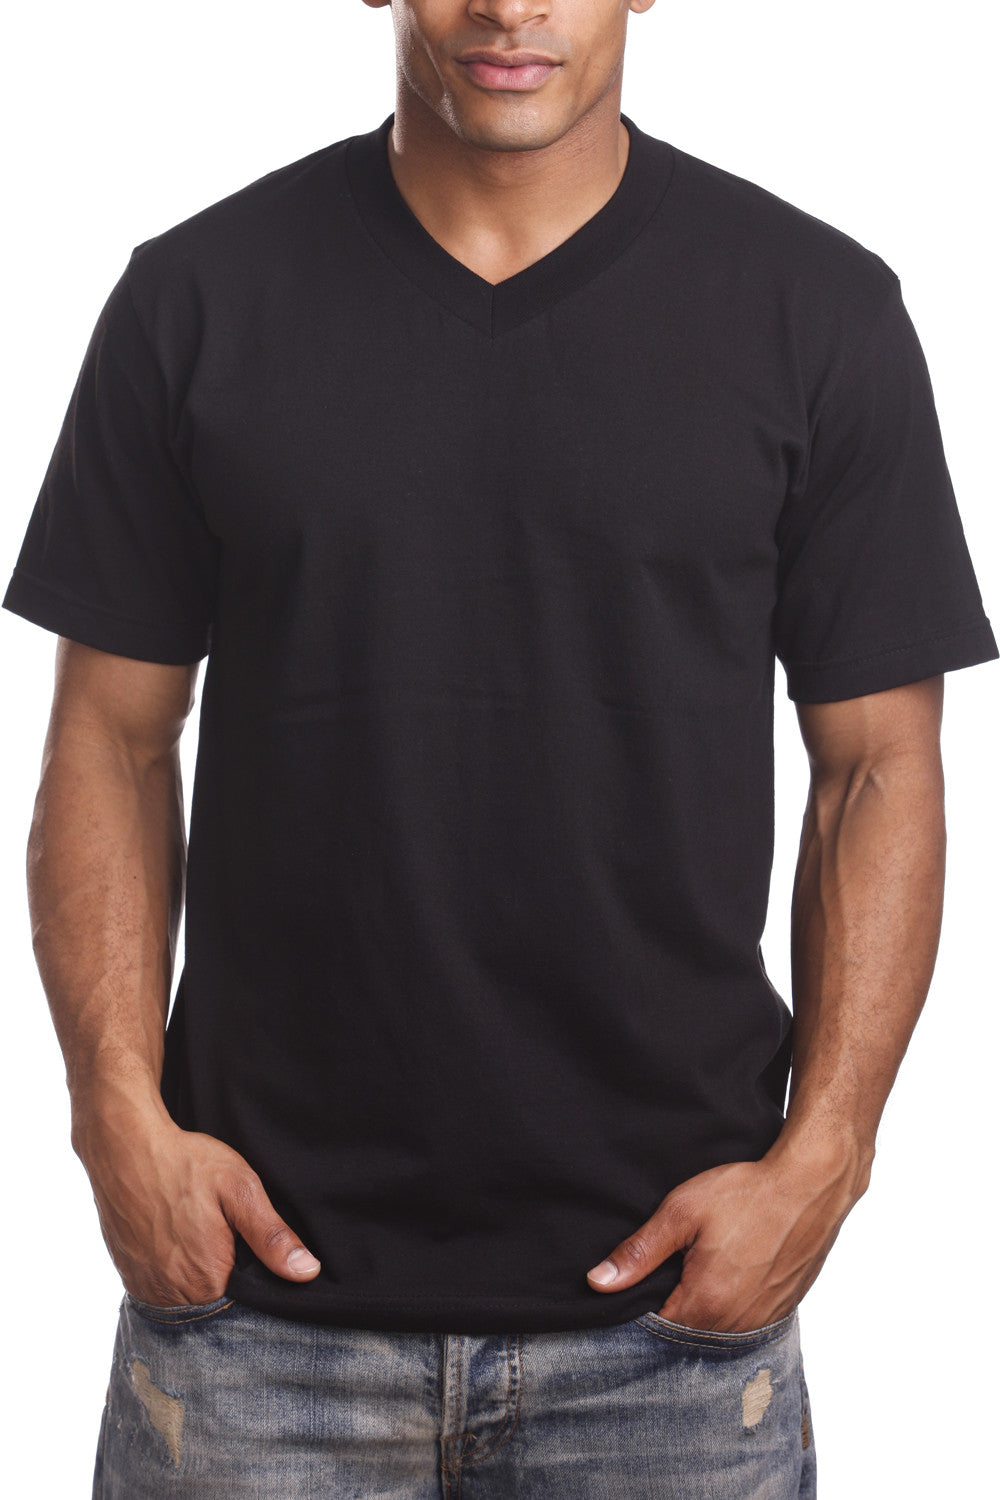 Men's Black V-Neck Tee with taped neck/shoulder seams. Sizes 2XL-5XL. Assorted colors. Material: Solid-100% Cotton, Charcoal/H Grey-80% Cotton Poly